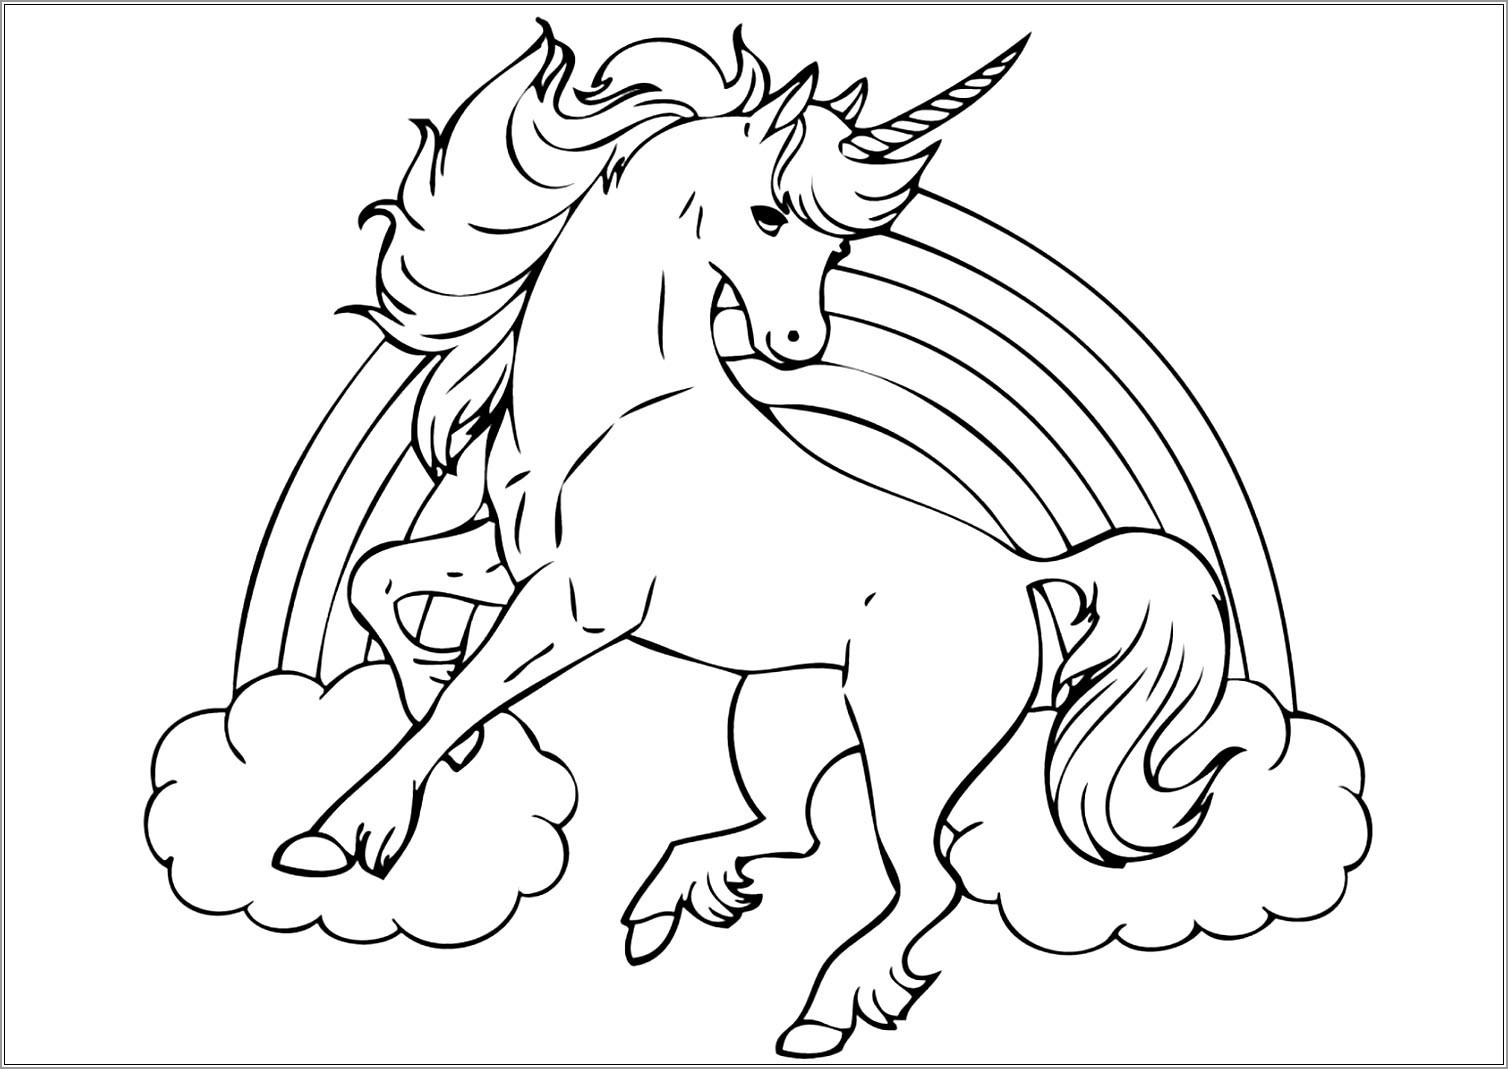 Unicorn Coloring Page for Kids   ColoringBay